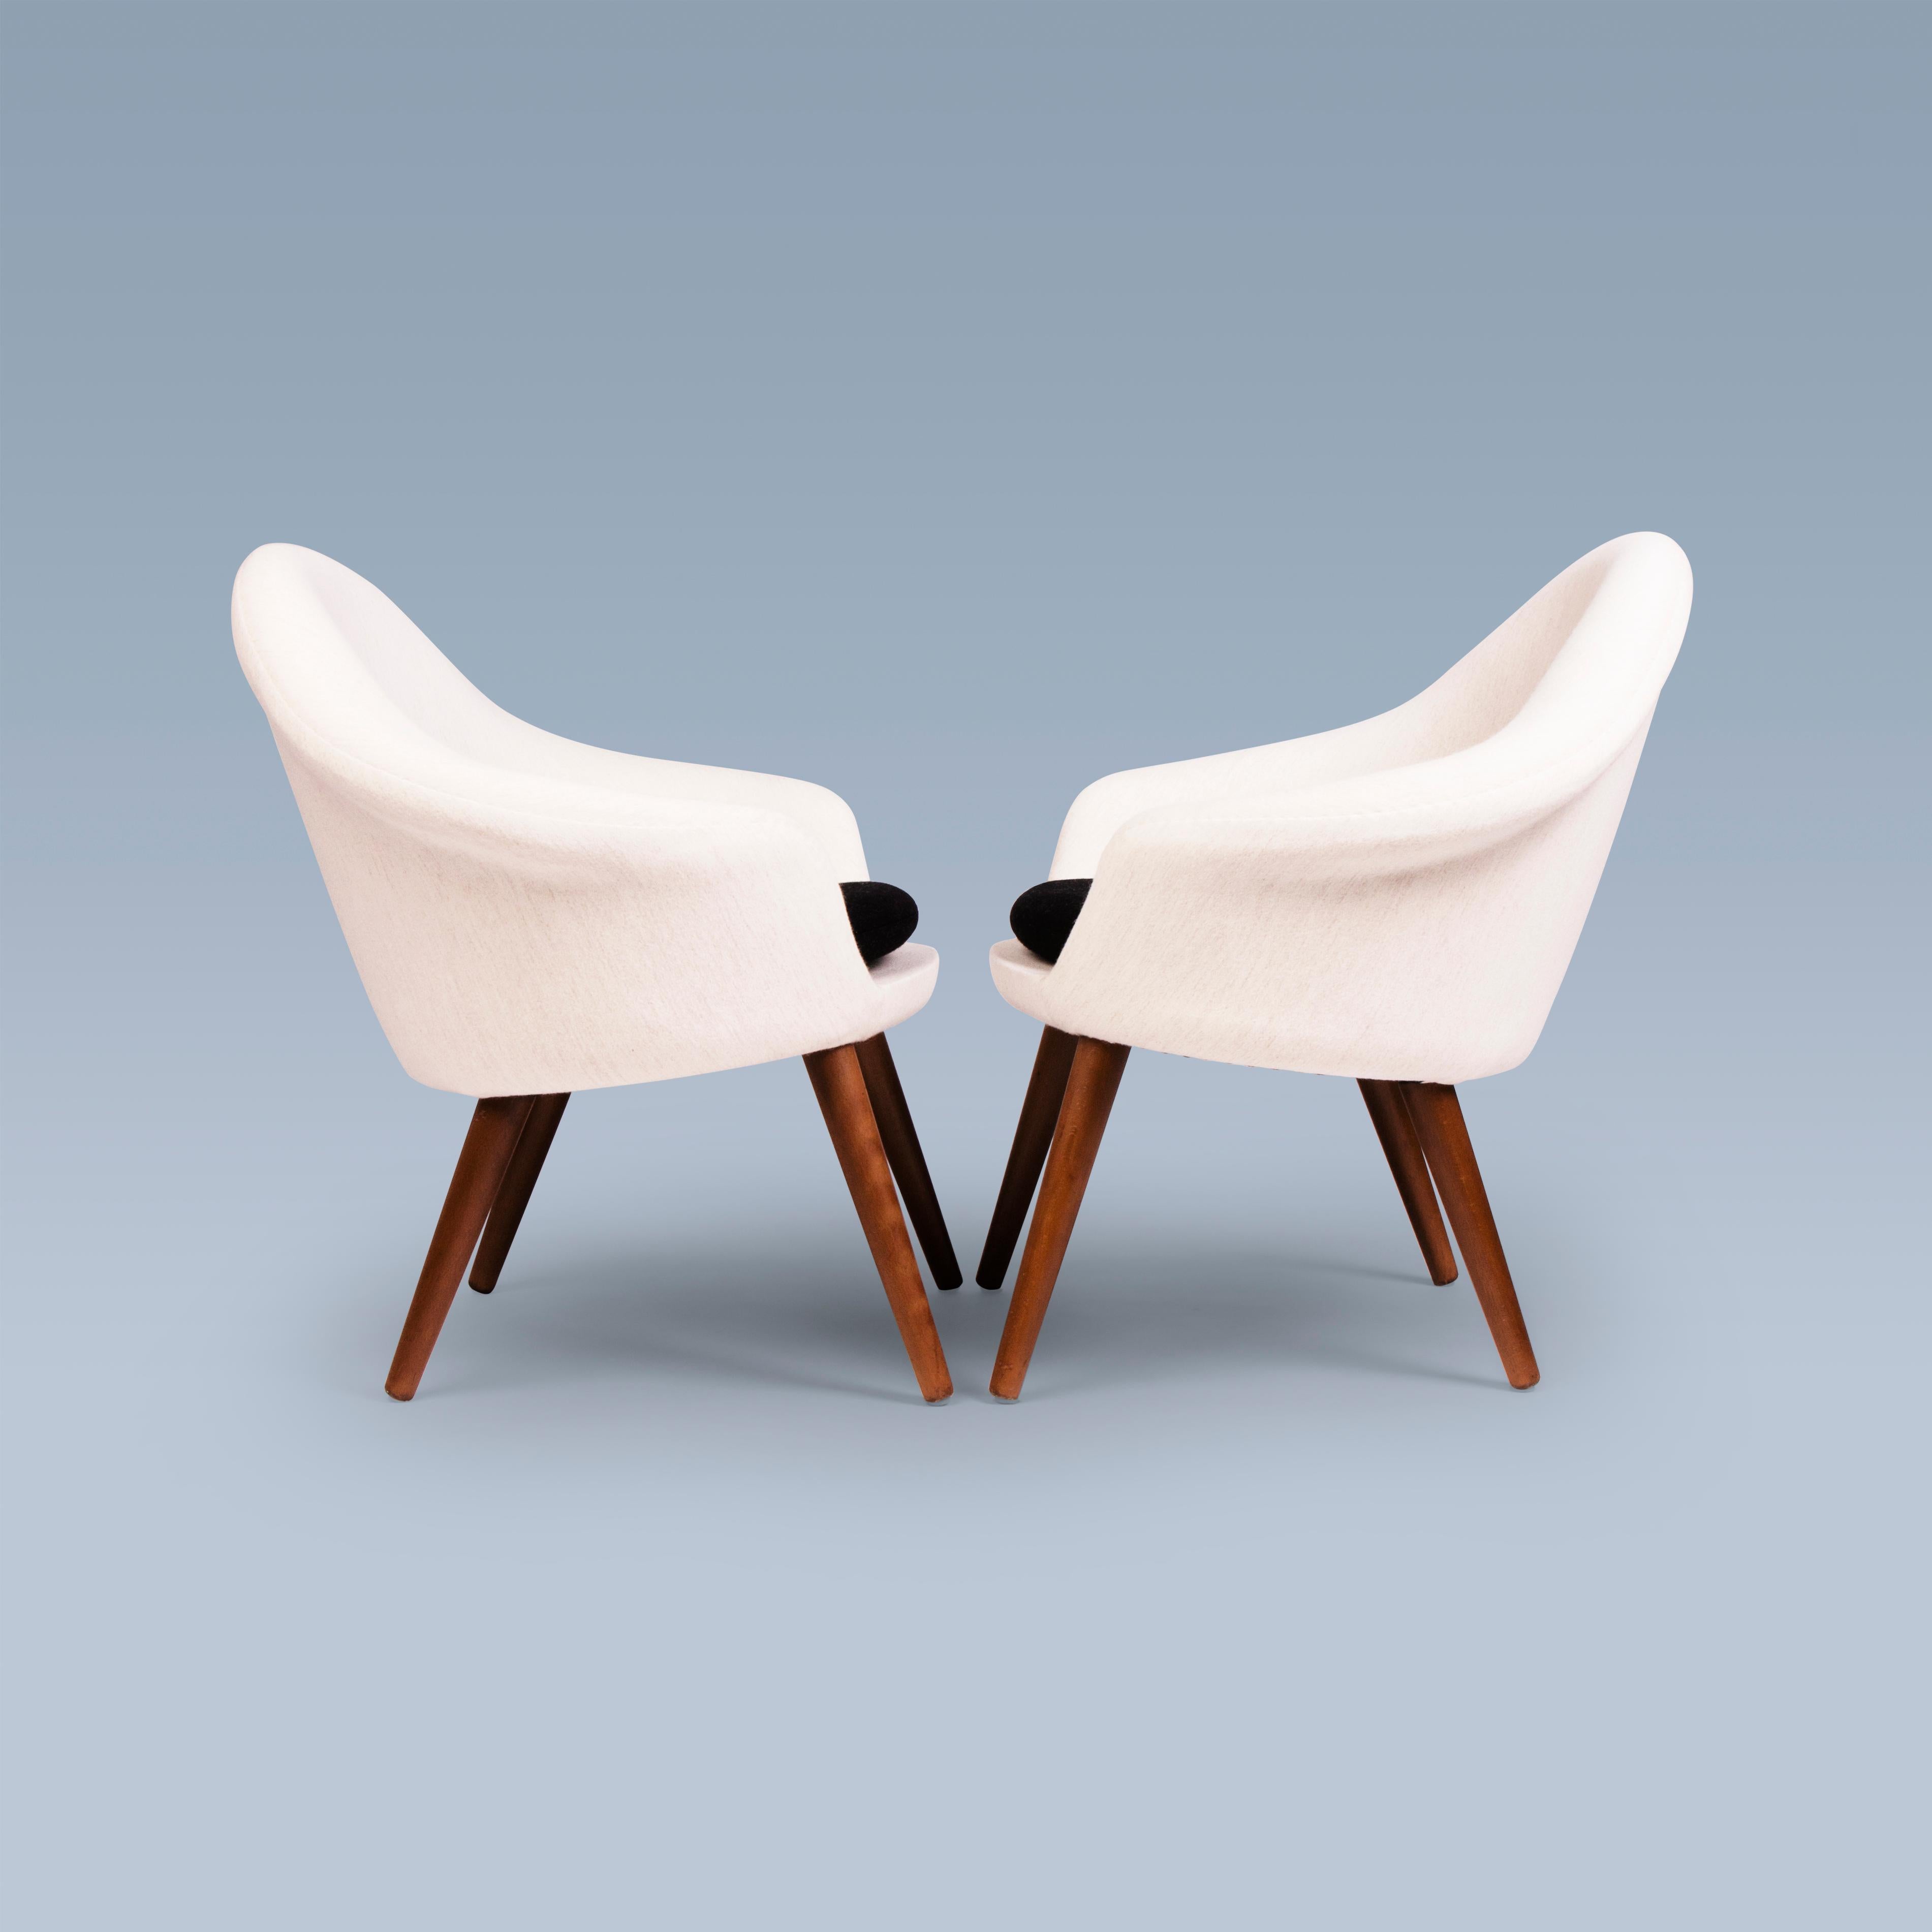 This pair of  lounge chairs with seat cushions were designed in 1956 by Hans Olsen (1919-1992). The chairs have model number 187. They are upholstered with white and black Savak wool by Gabriel. Their legs are of stained wood.
The lounge chairs are